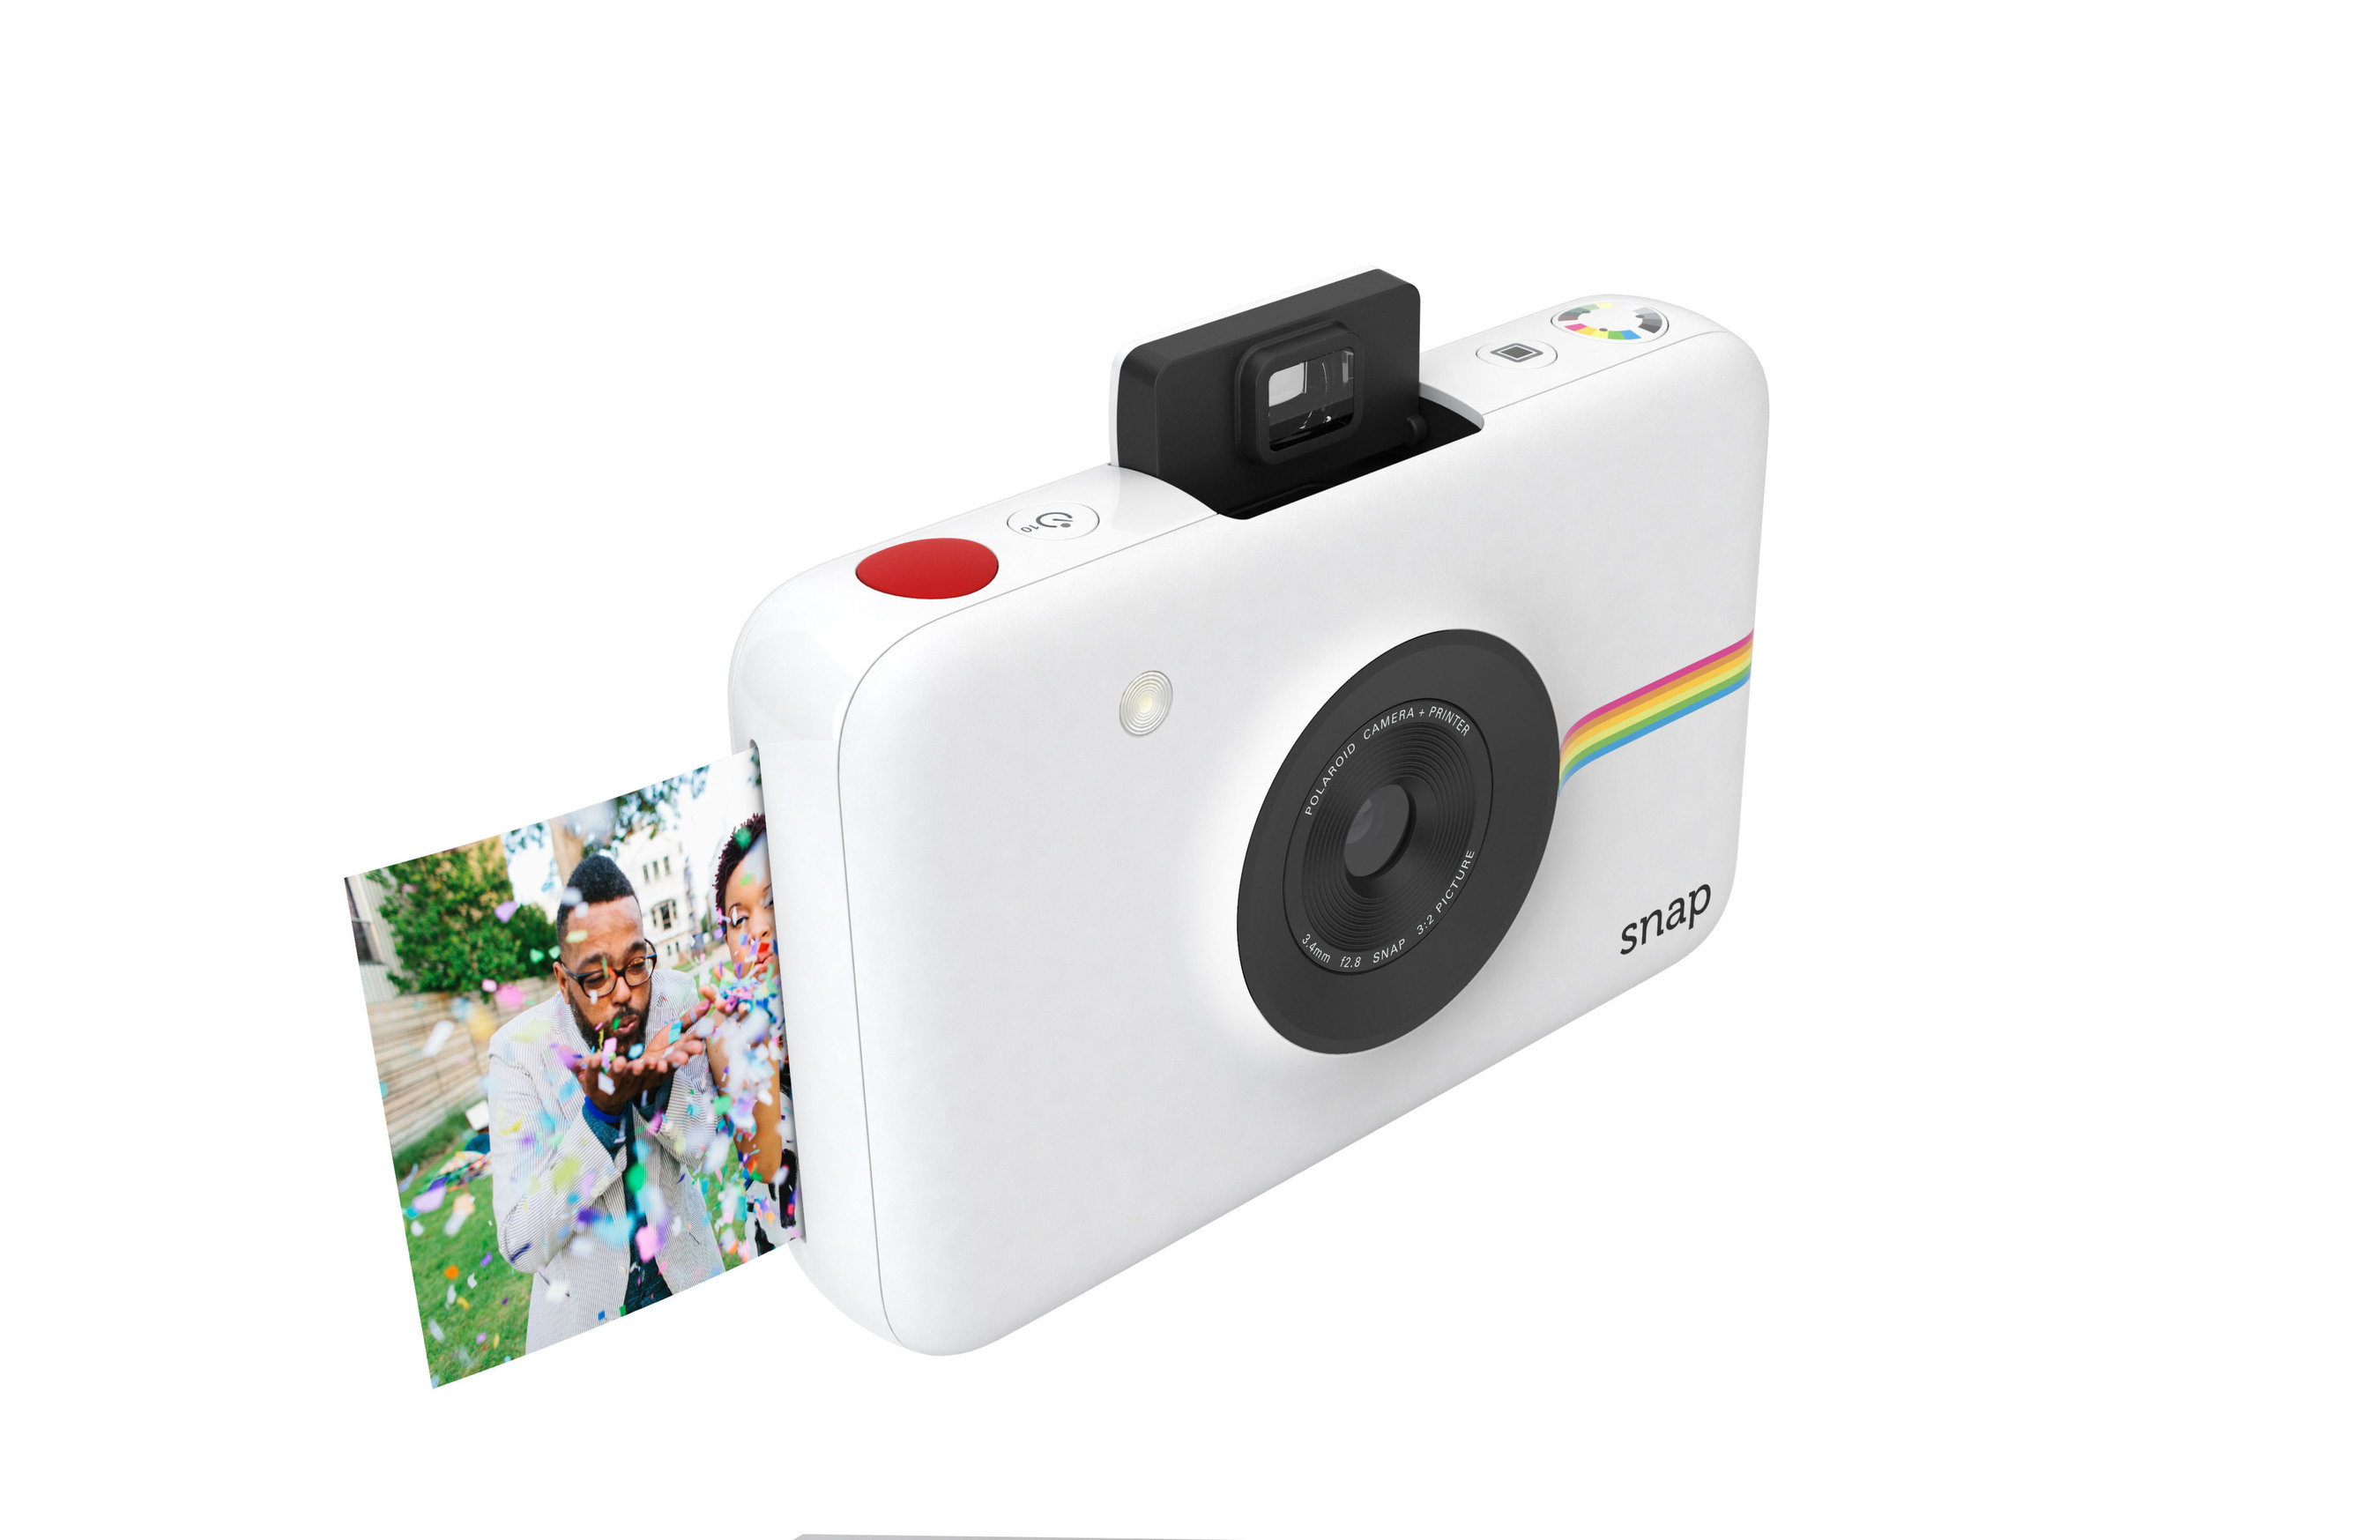 The Polaroid Snap instant digital camera is now available in the US and UK.